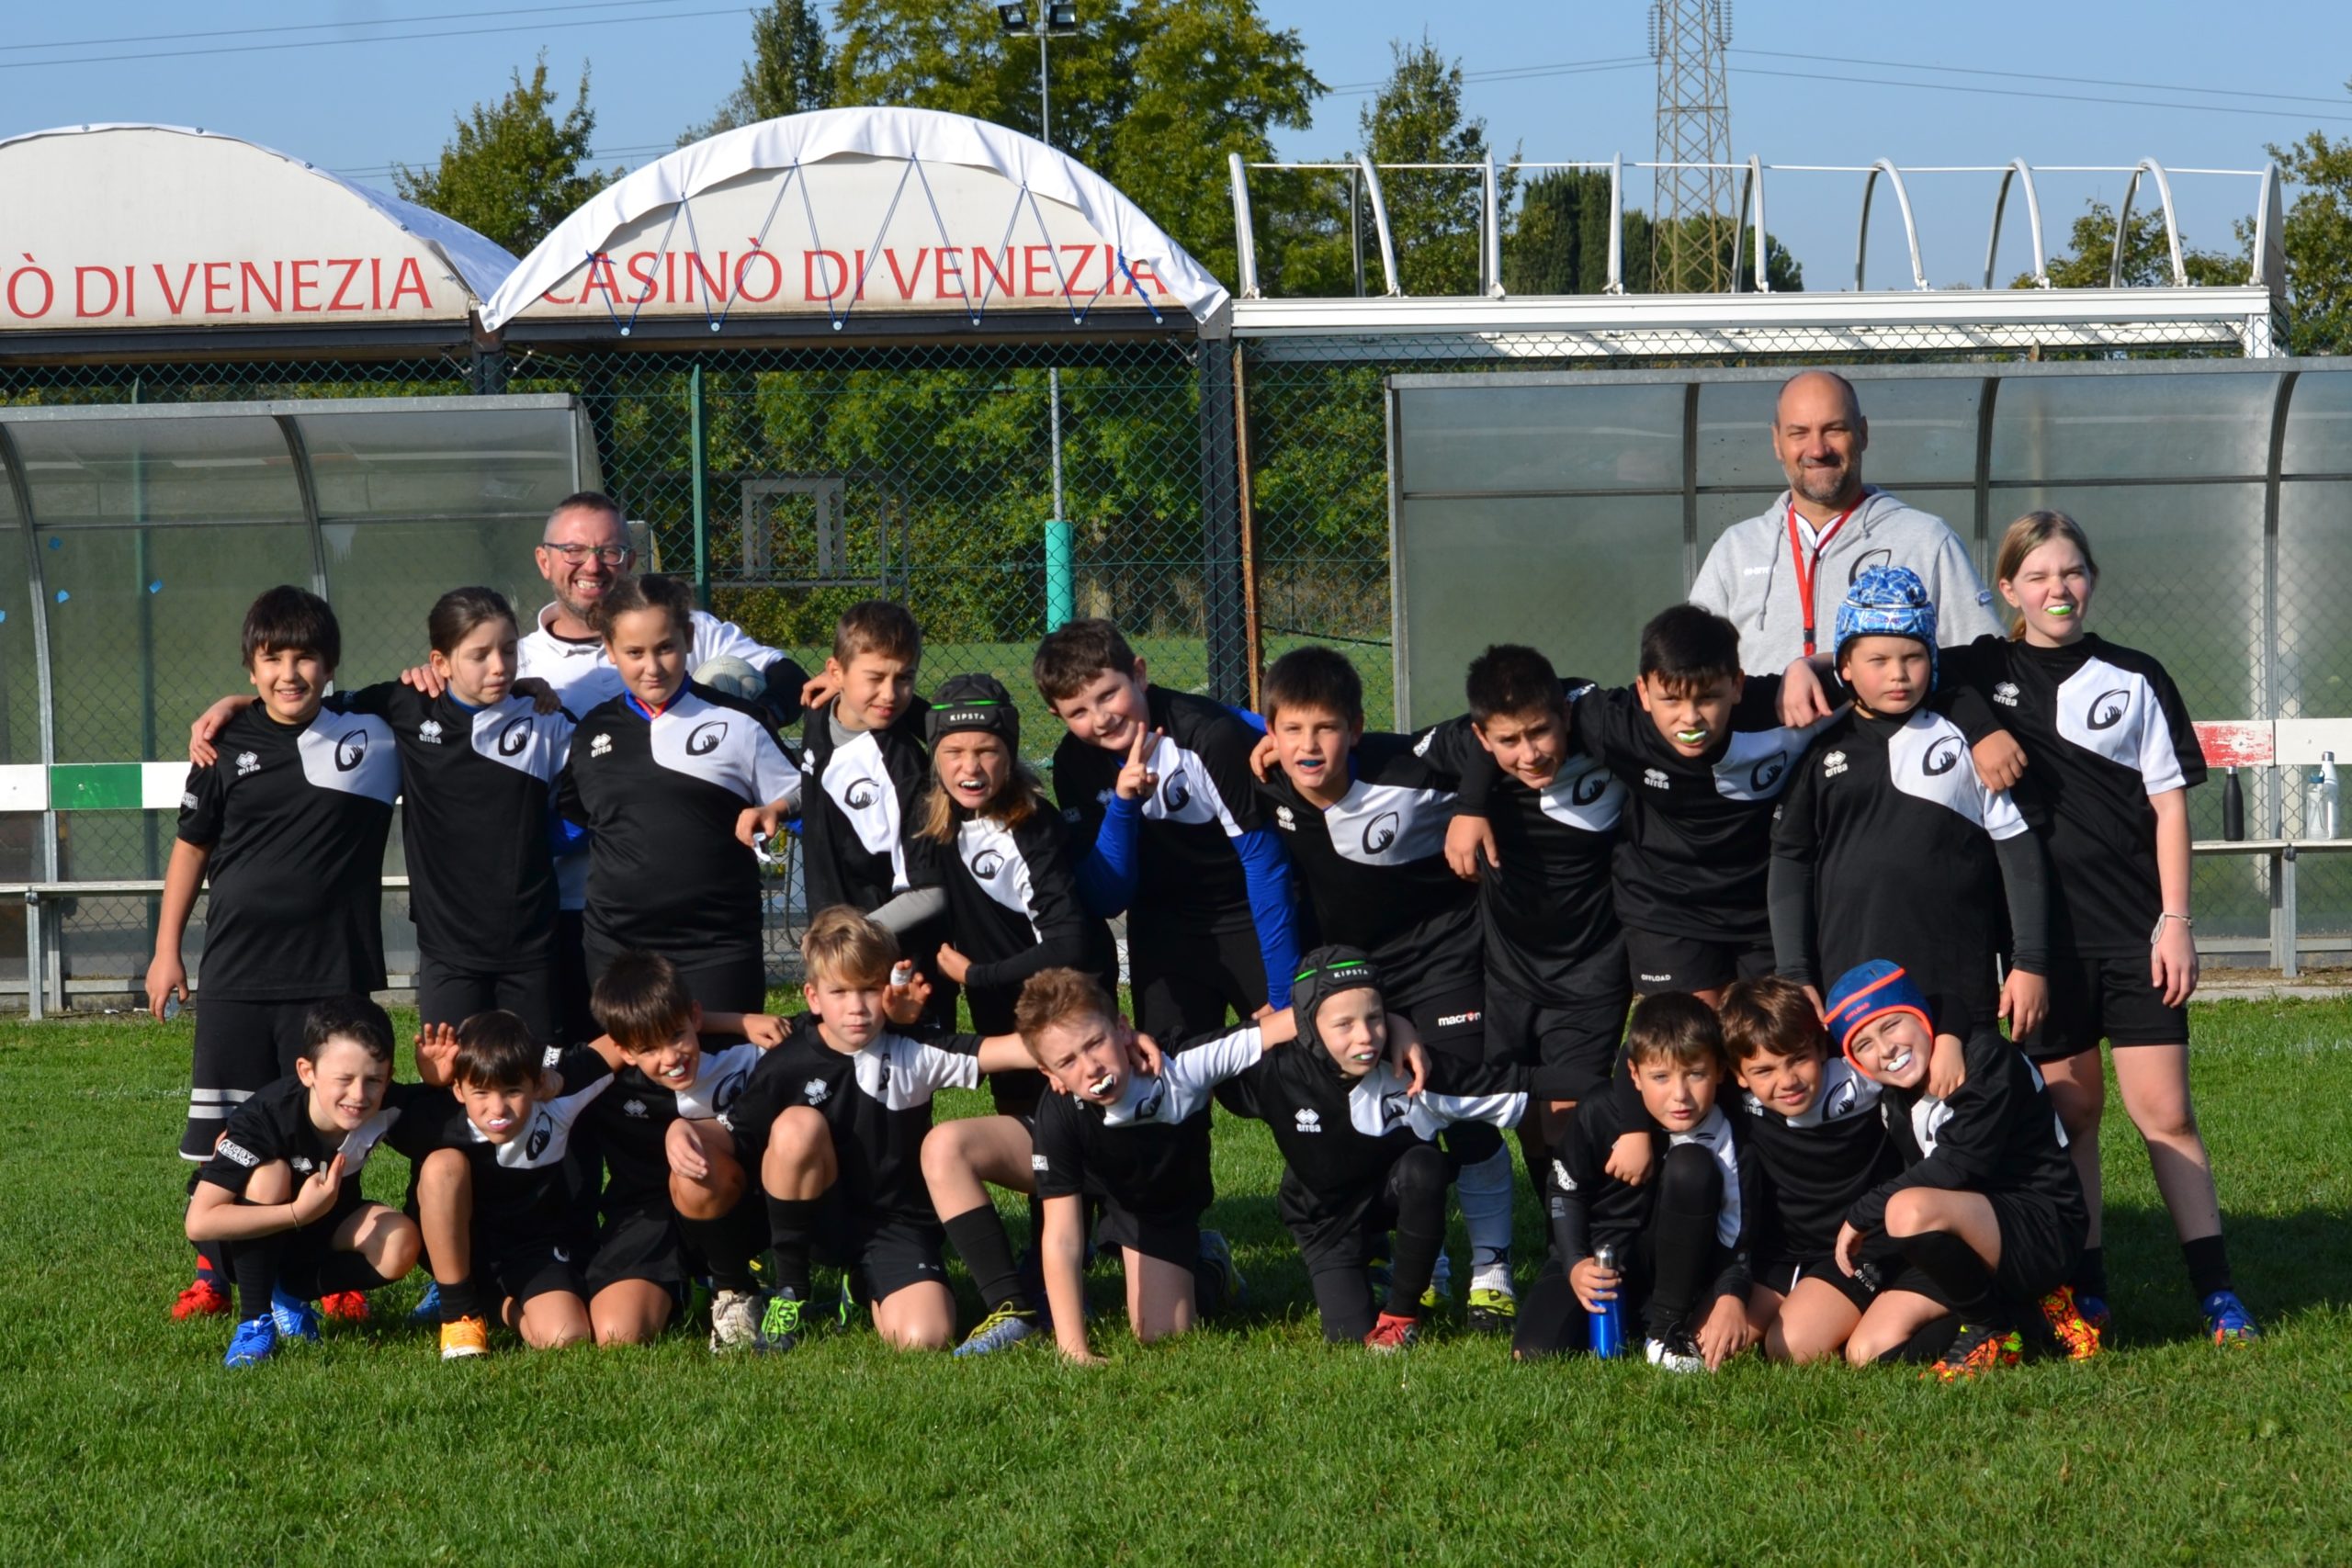 Rugby Mirano 1957 ASD - Under 11 SS 2021/2022